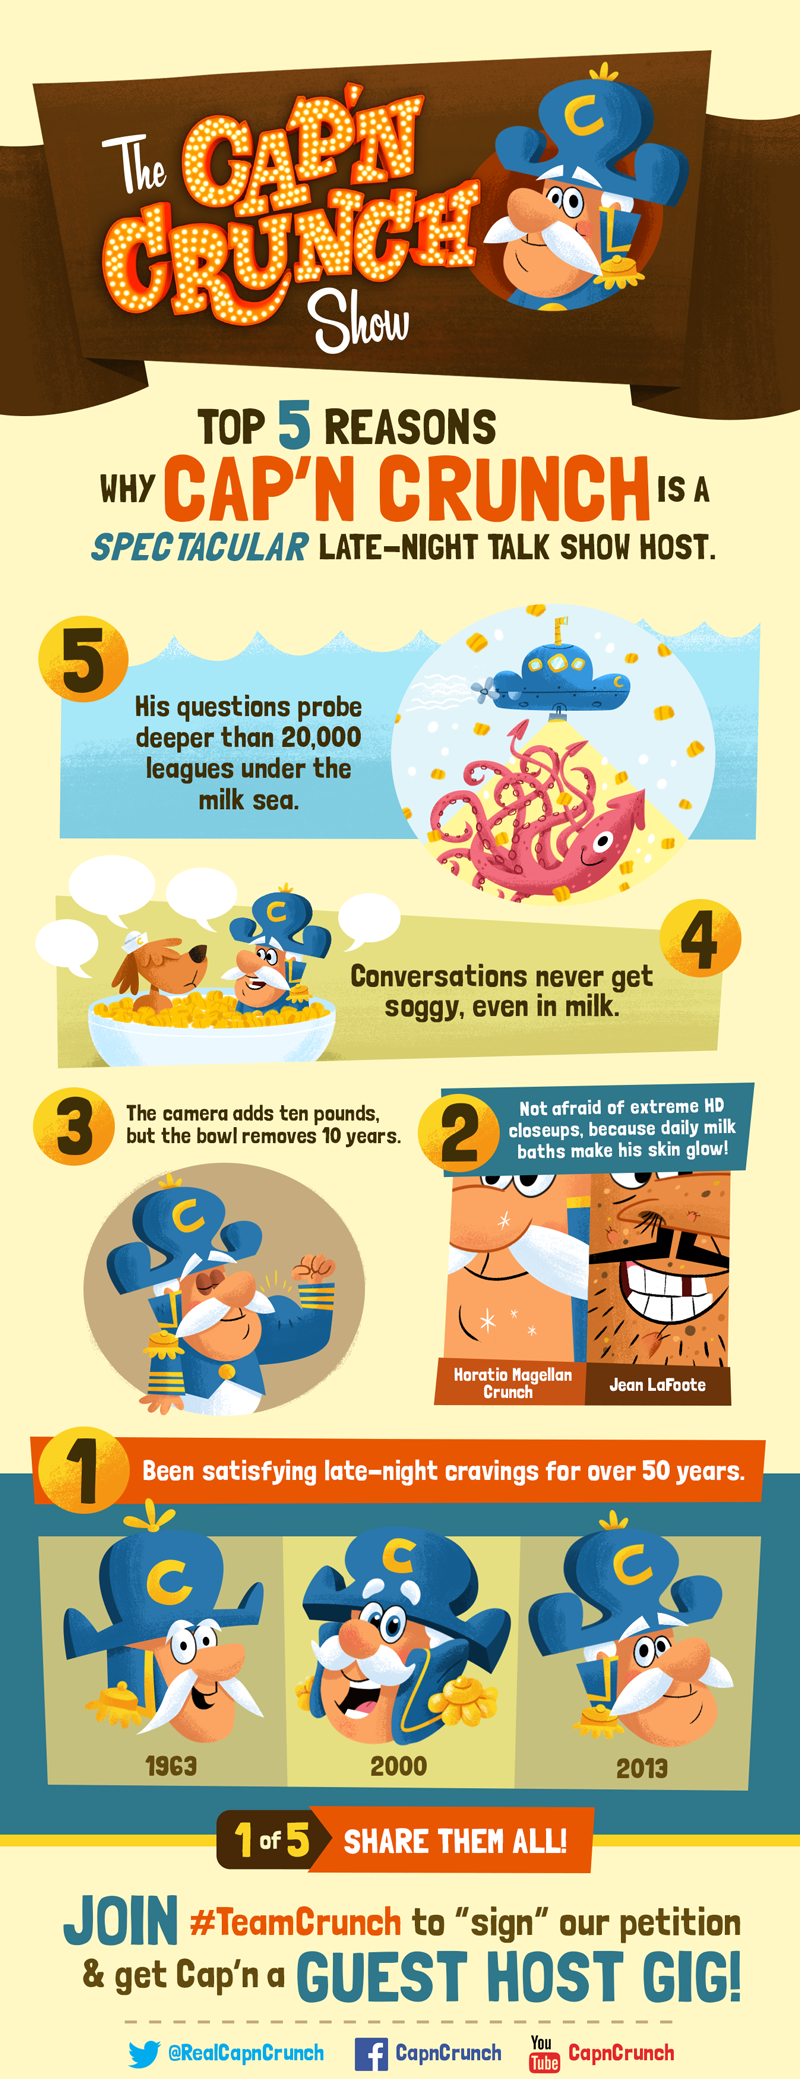 The Cap'n Crunch Show - #TeamCrunch - Top 5 reasons why Cap'n Crunch is a spectacular late-night talk show host.